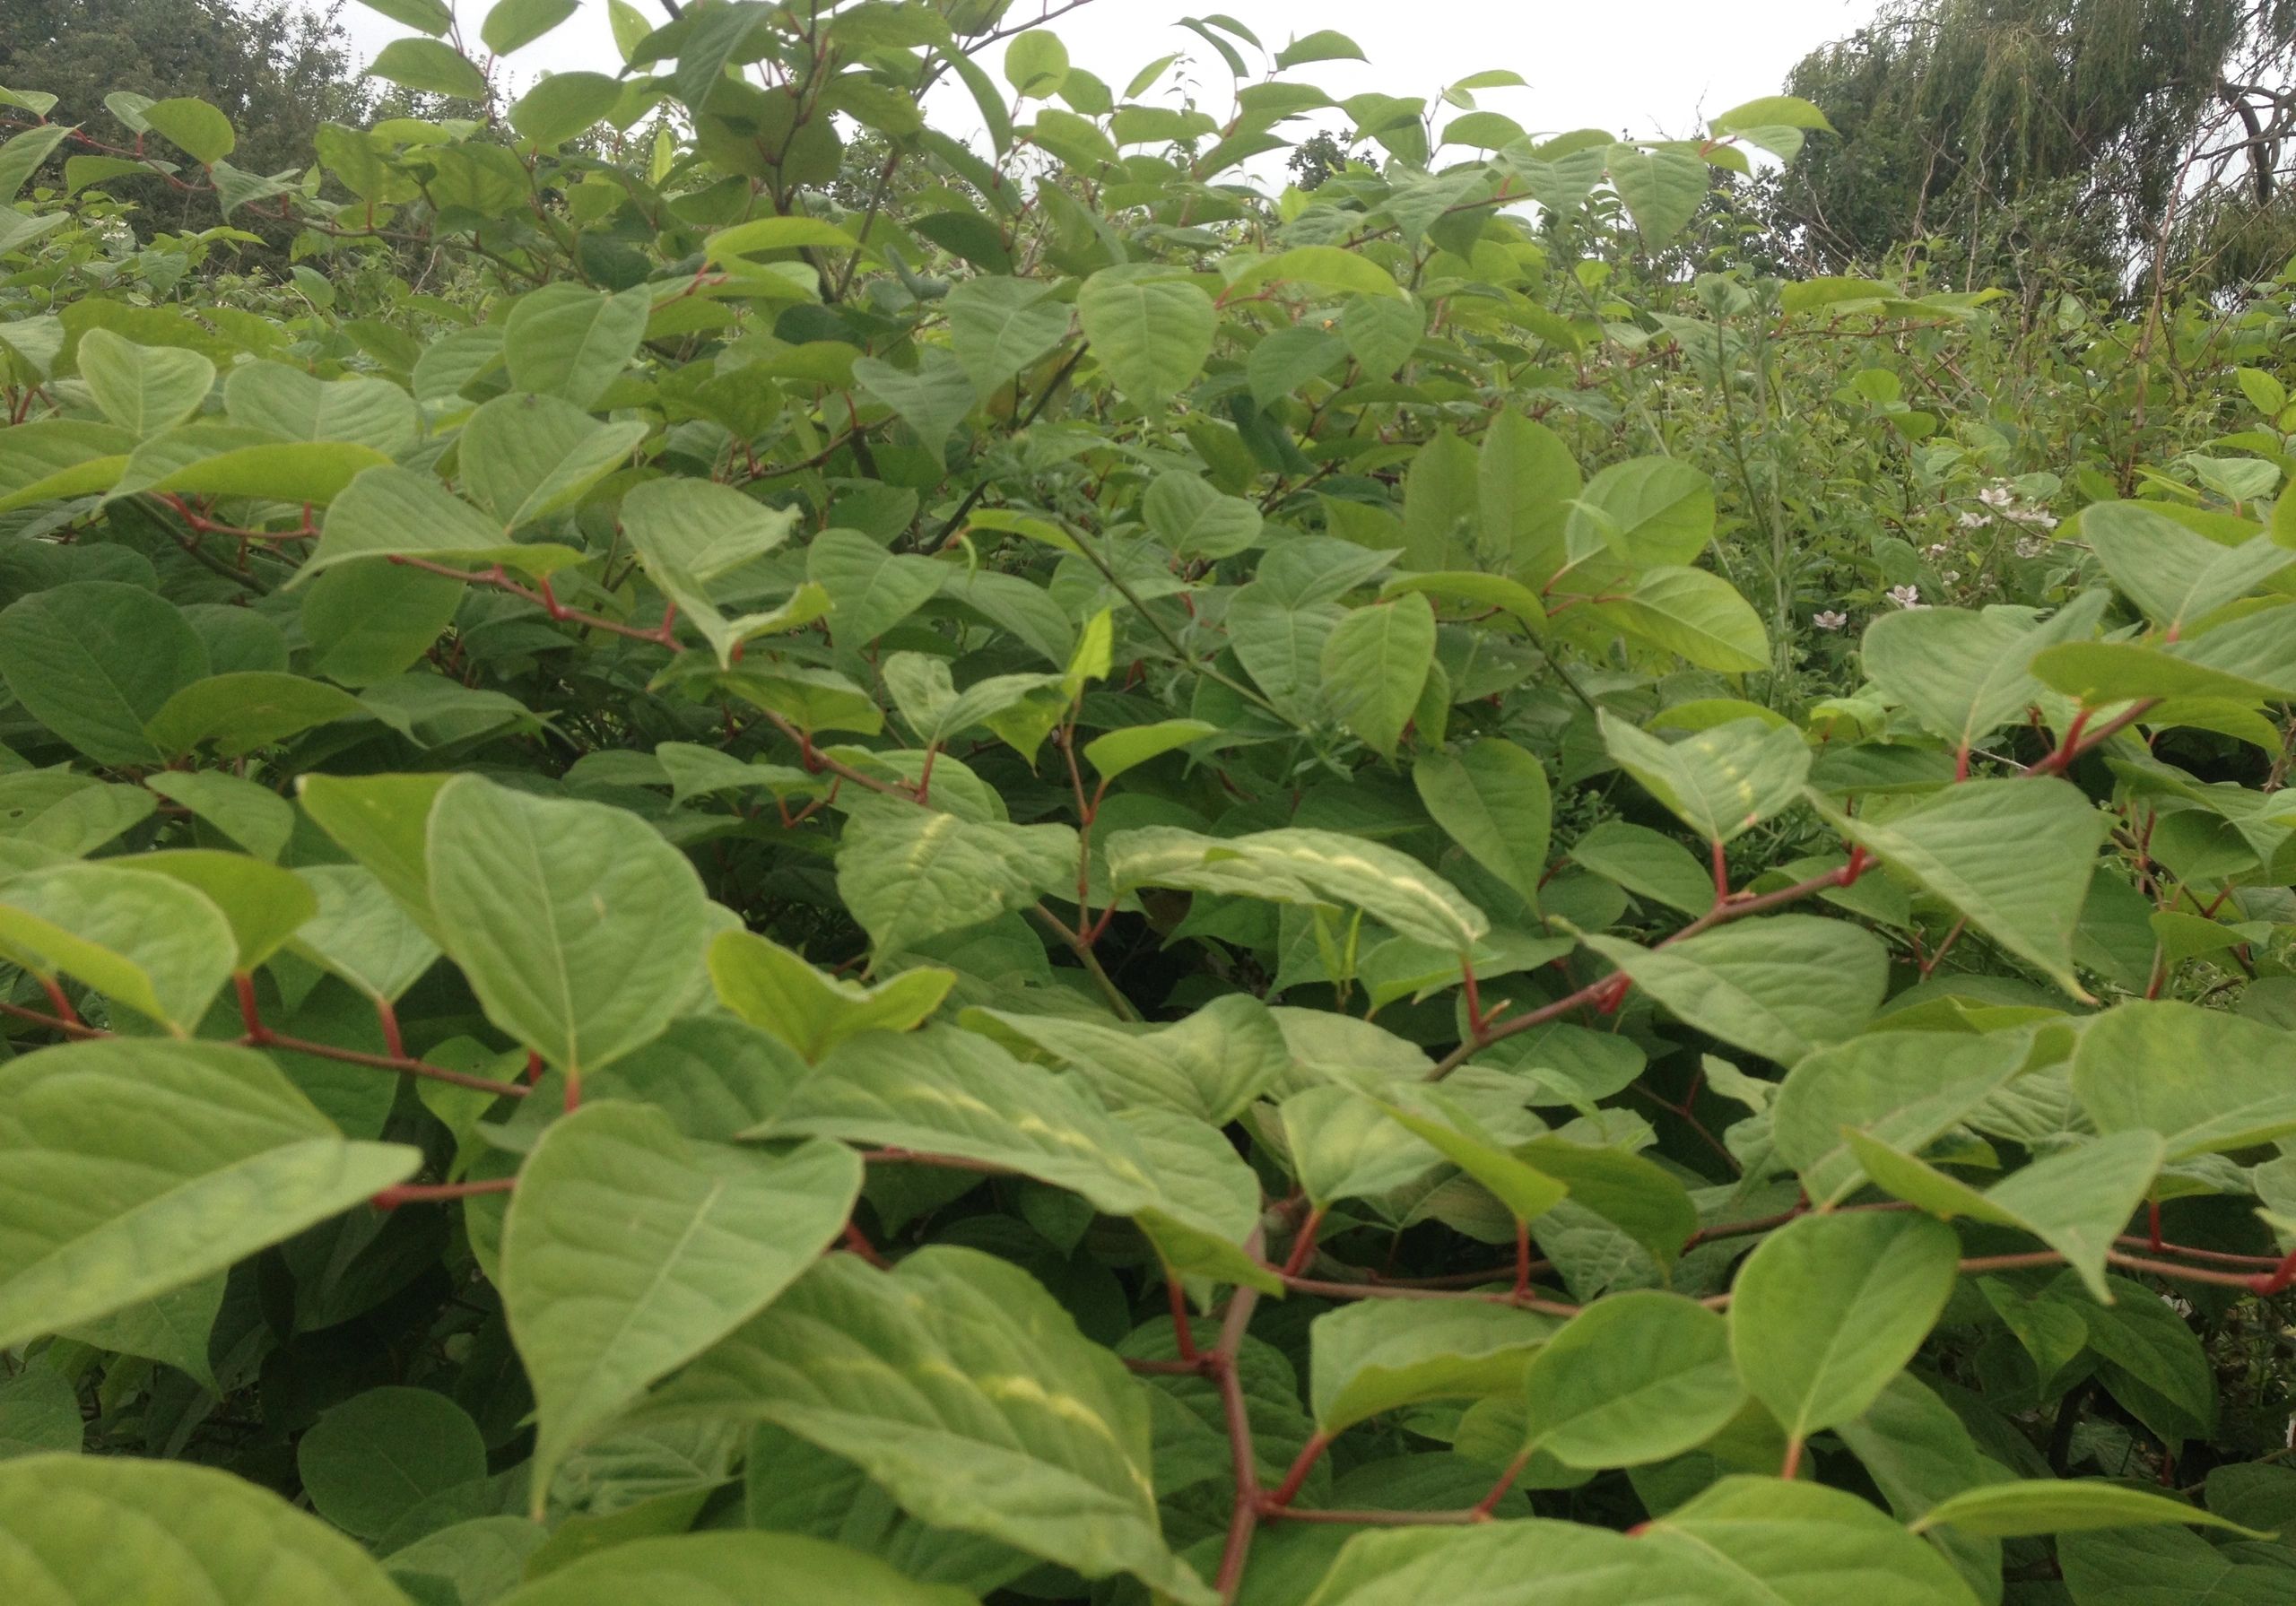 Huge Japanese Knotweed stand in Colchester, Essex. The lines on the leaves are damage from frost.